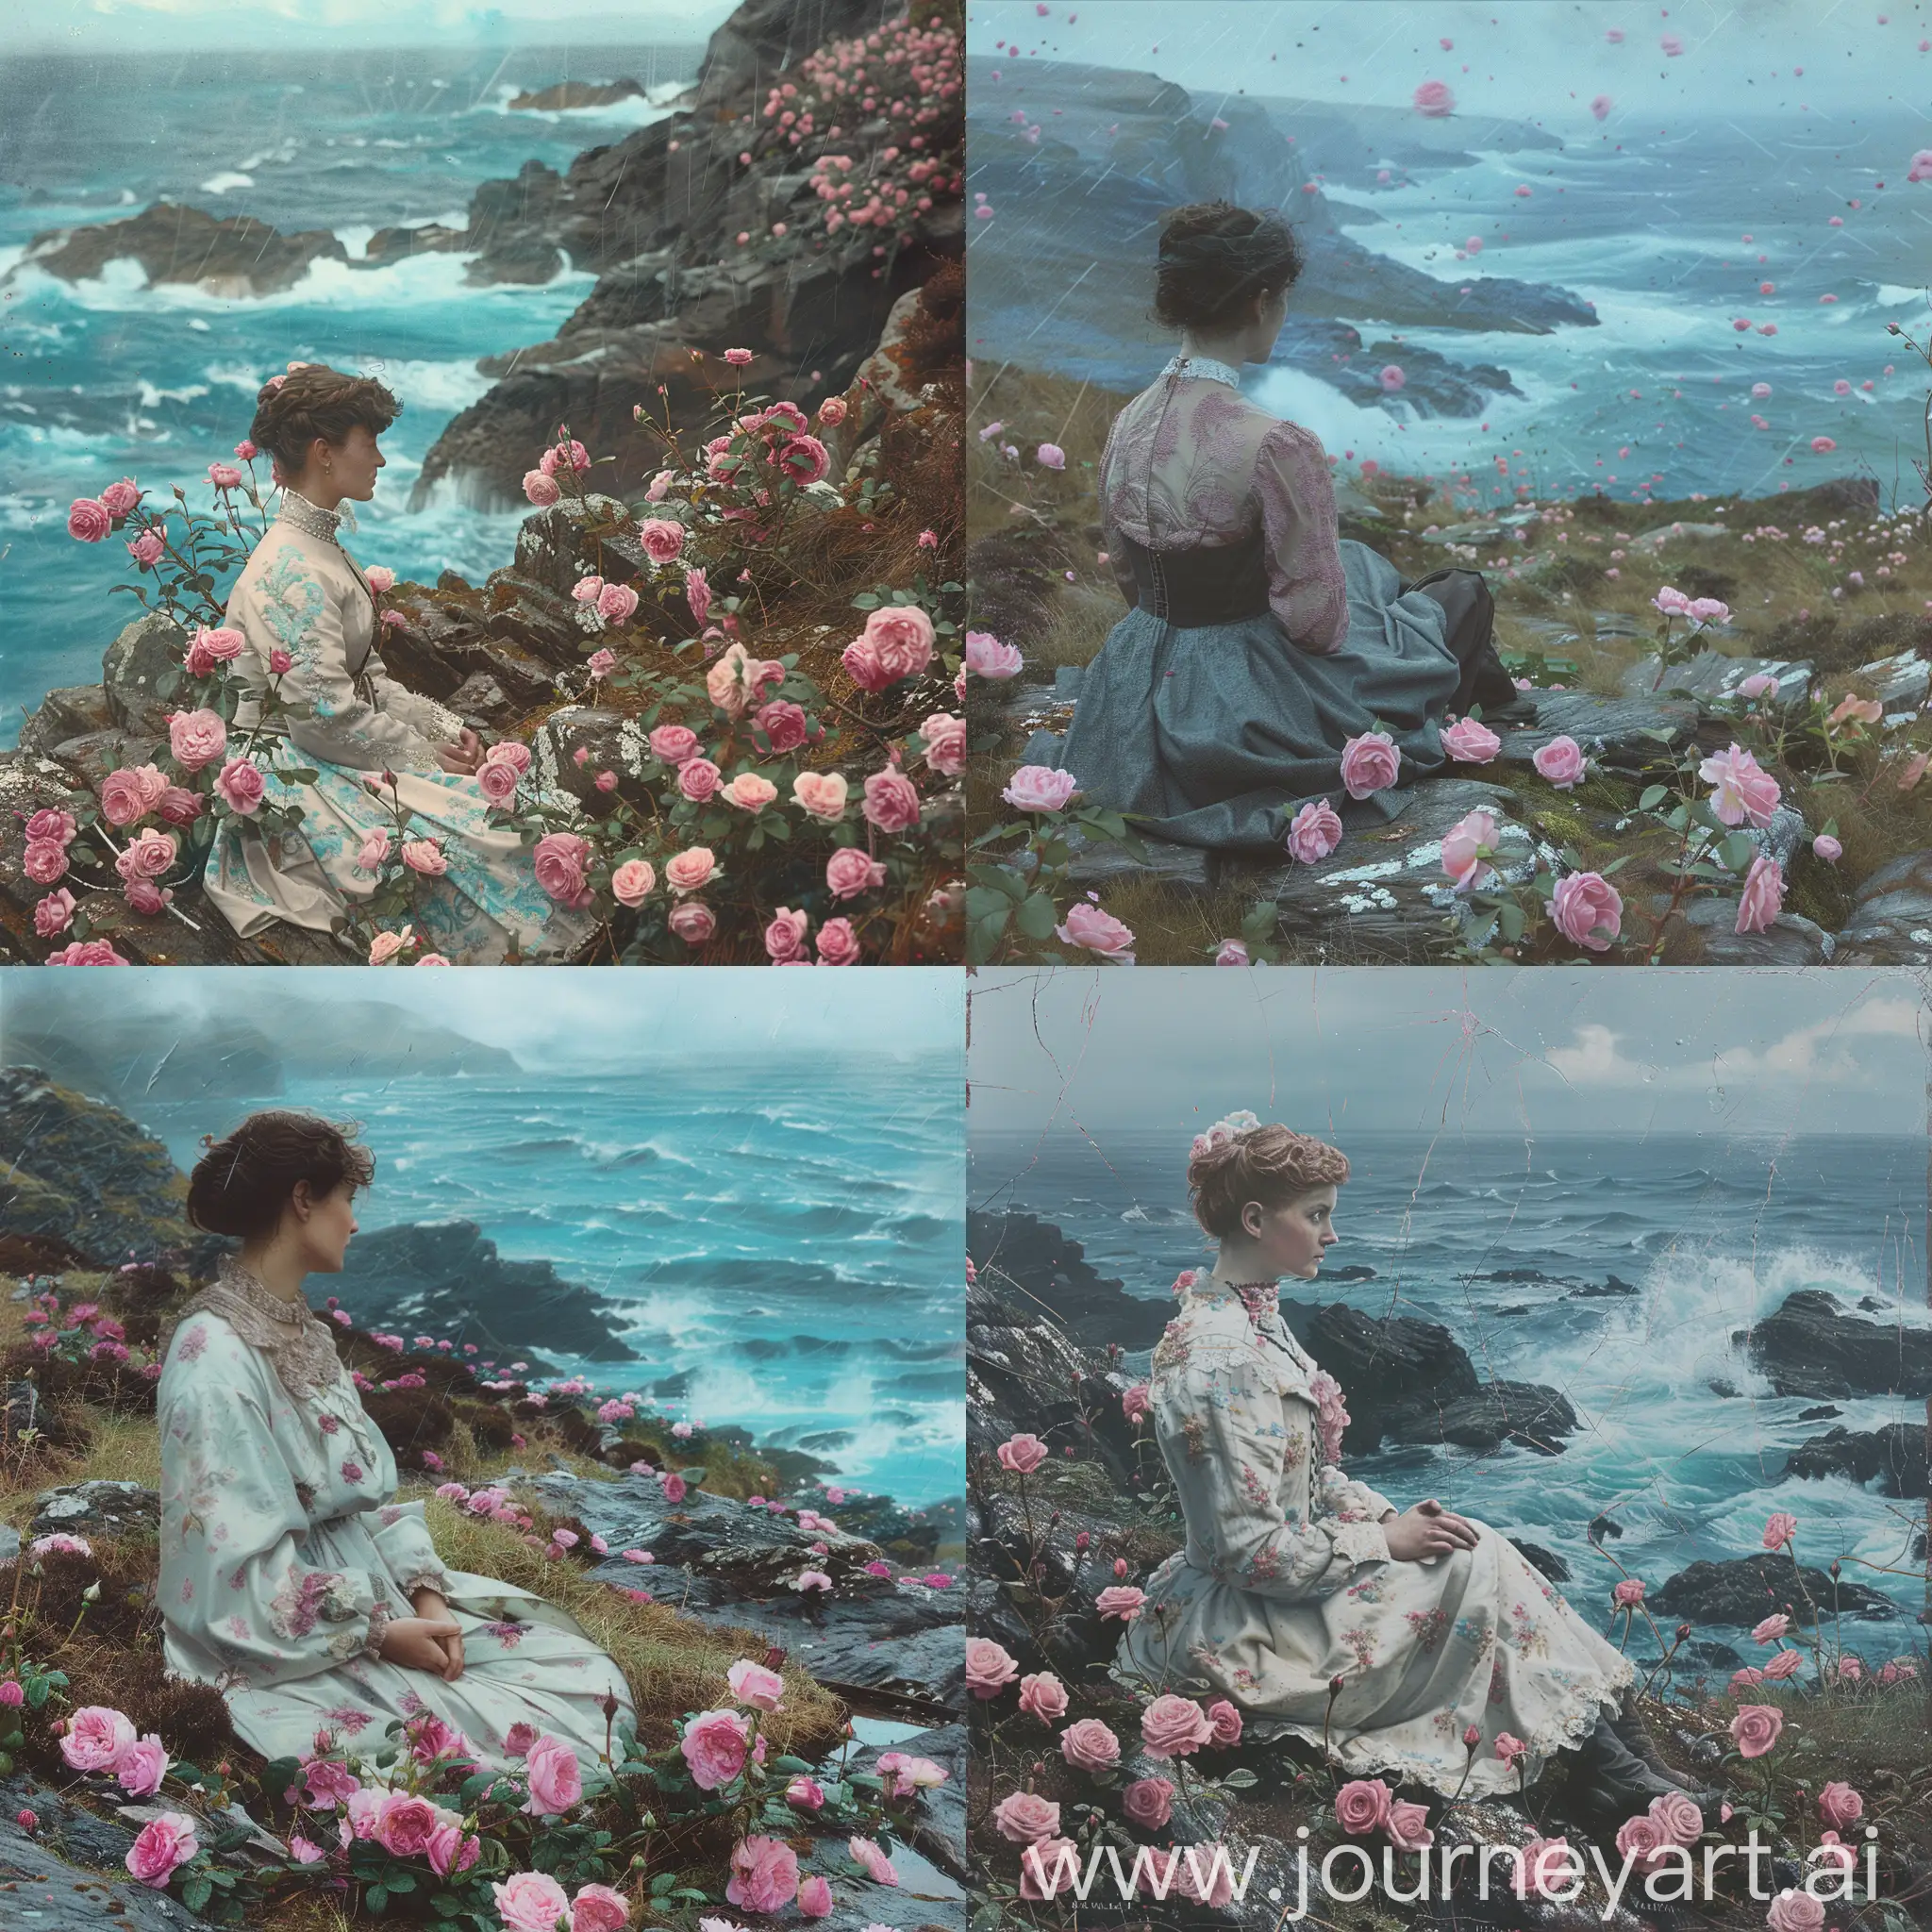 Lonely-Edwardian-Woman-Contemplating-by-the-Rocky-Coastline-amidst-Pink-Roses